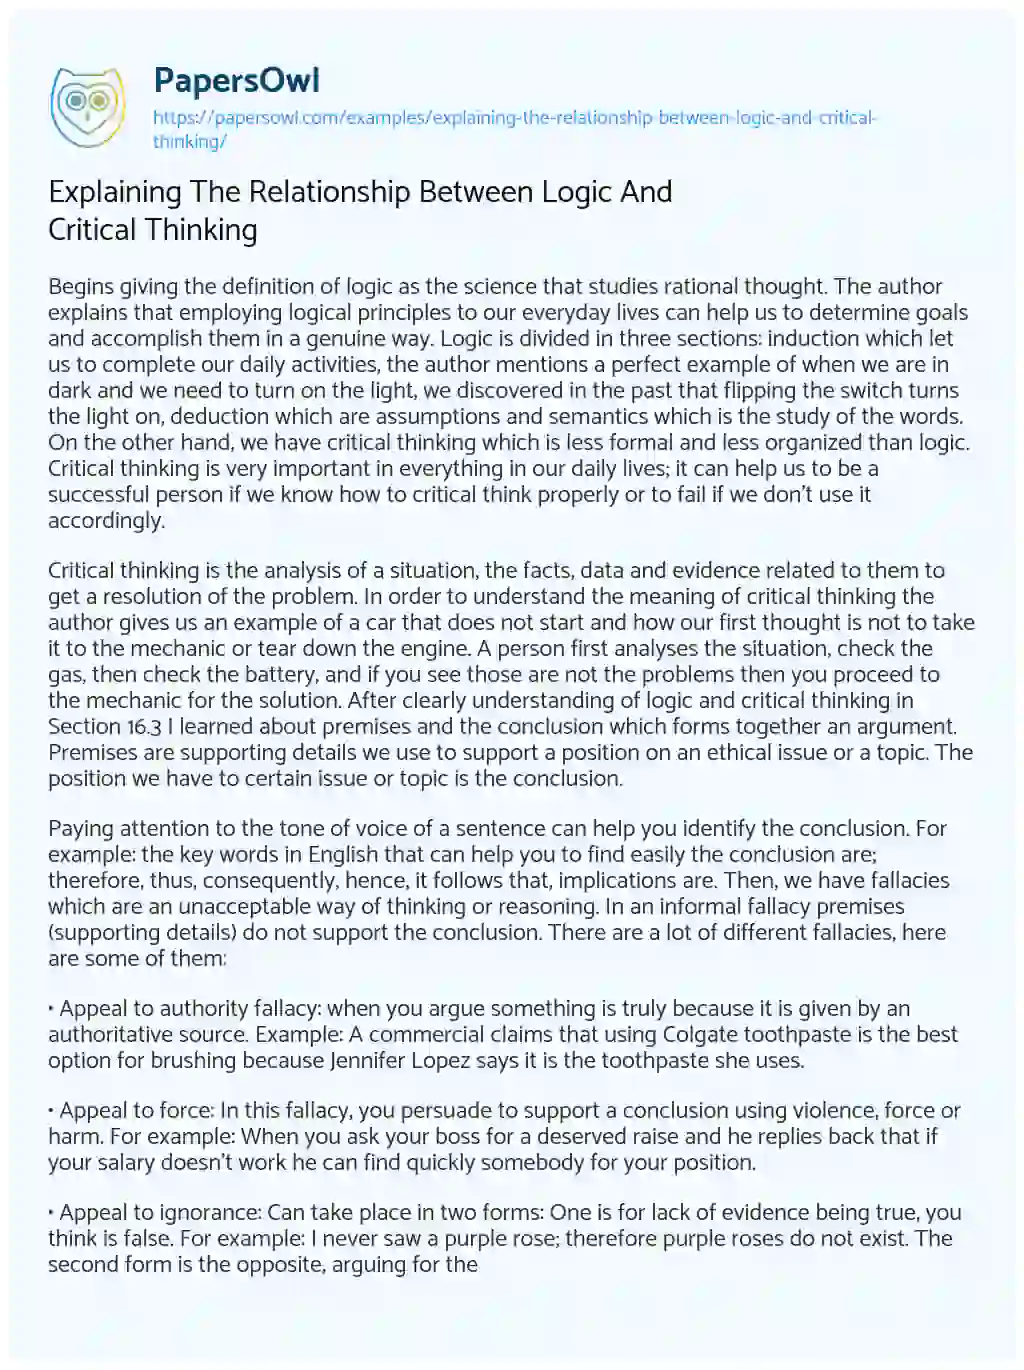 Explaining the Relationship between Logic and Critical Thinking essay